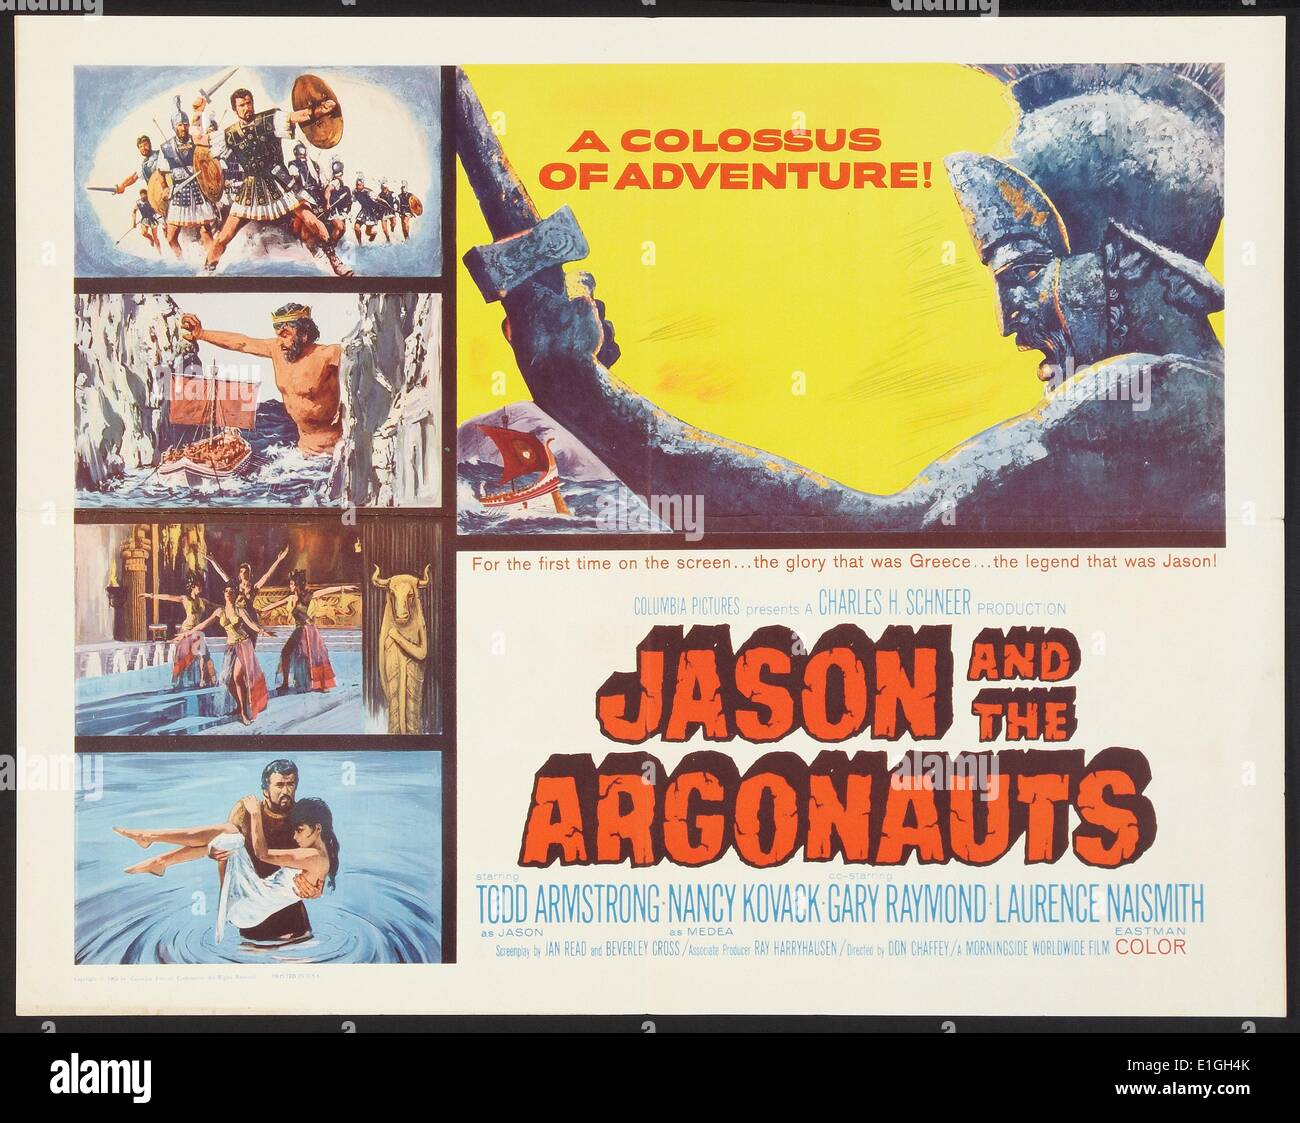 Jason and the Argonauts a 1963 film starring Todd Armstrong. Stock Photo